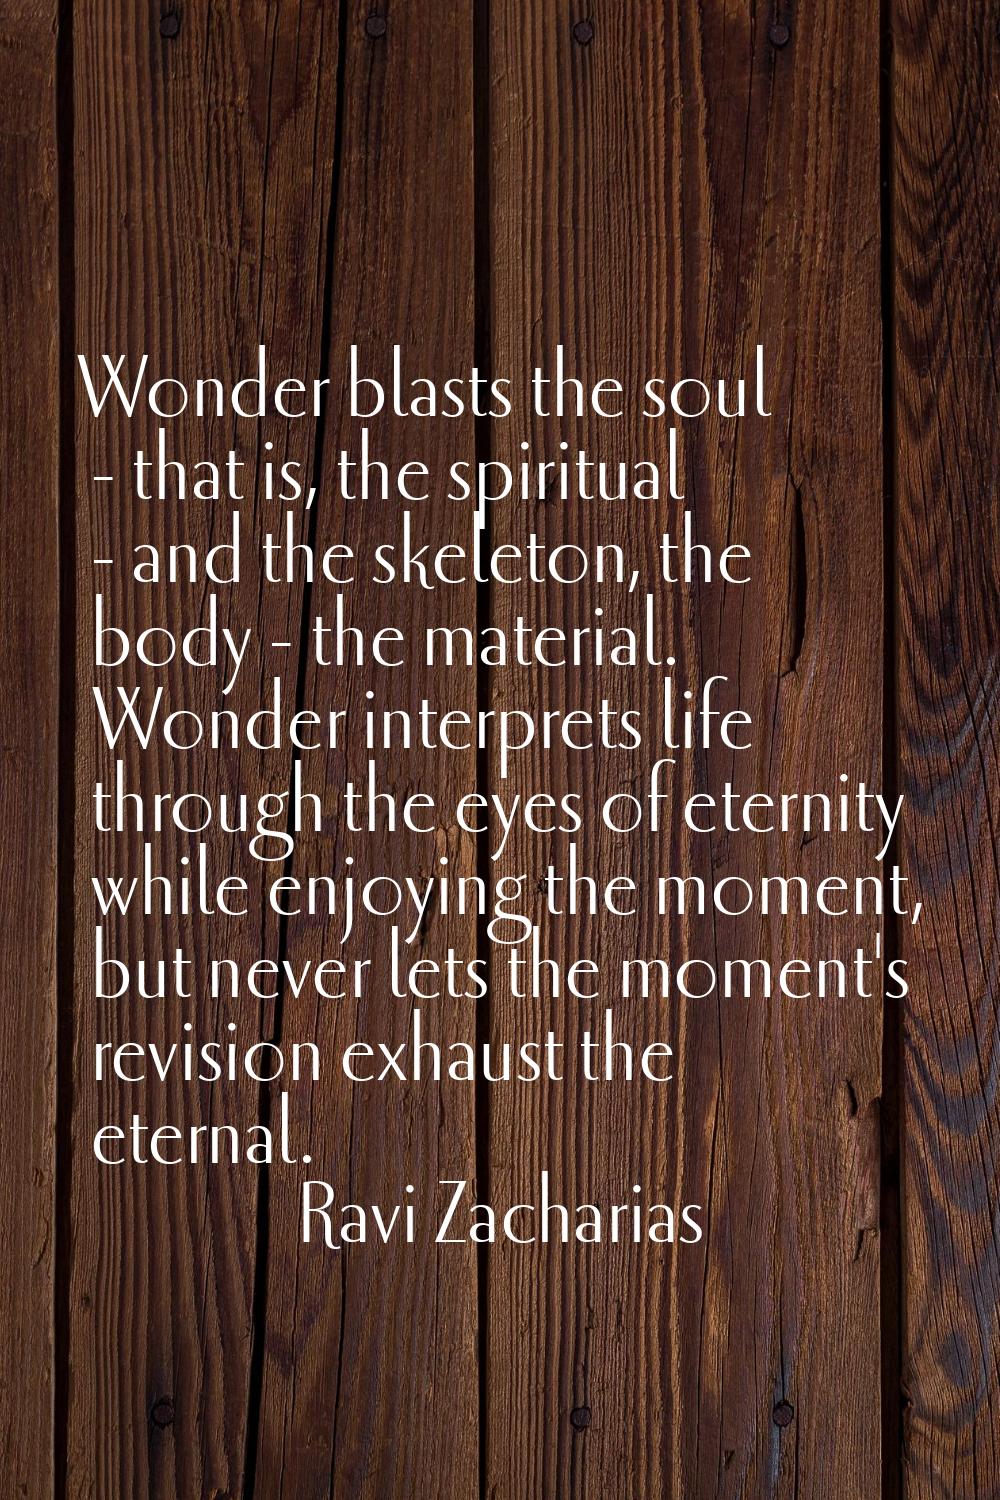 Wonder blasts the soul - that is, the spiritual - and the skeleton, the body - the material. Wonder